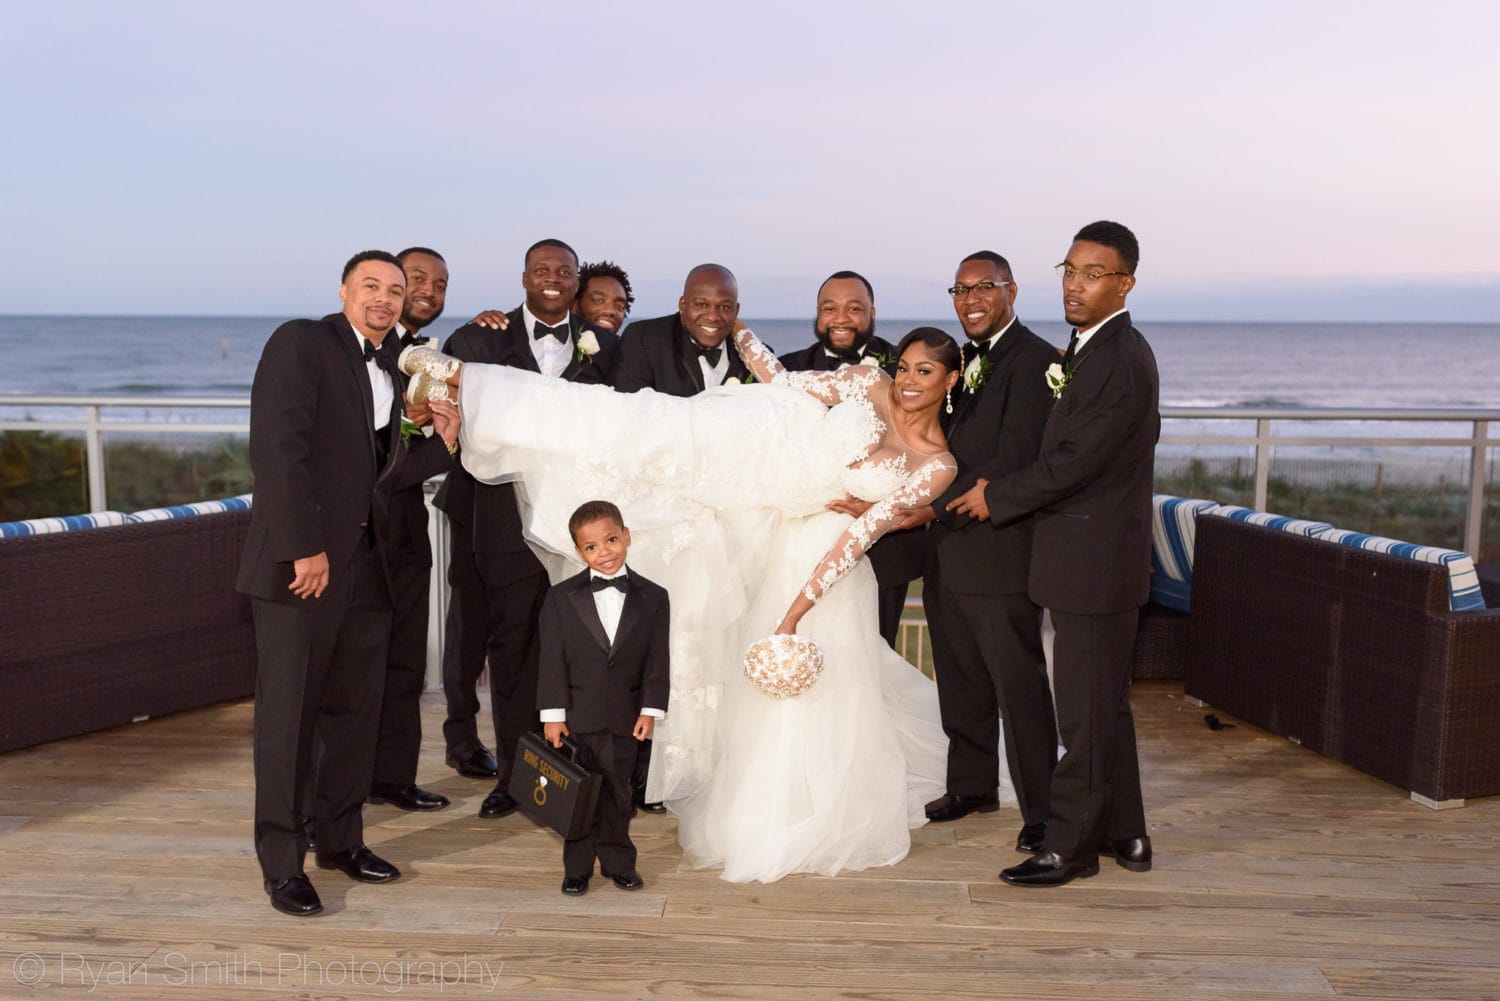 Groomsmen lifting up bride into the air - Doubletree Resort by Hilton Myrtle Beach